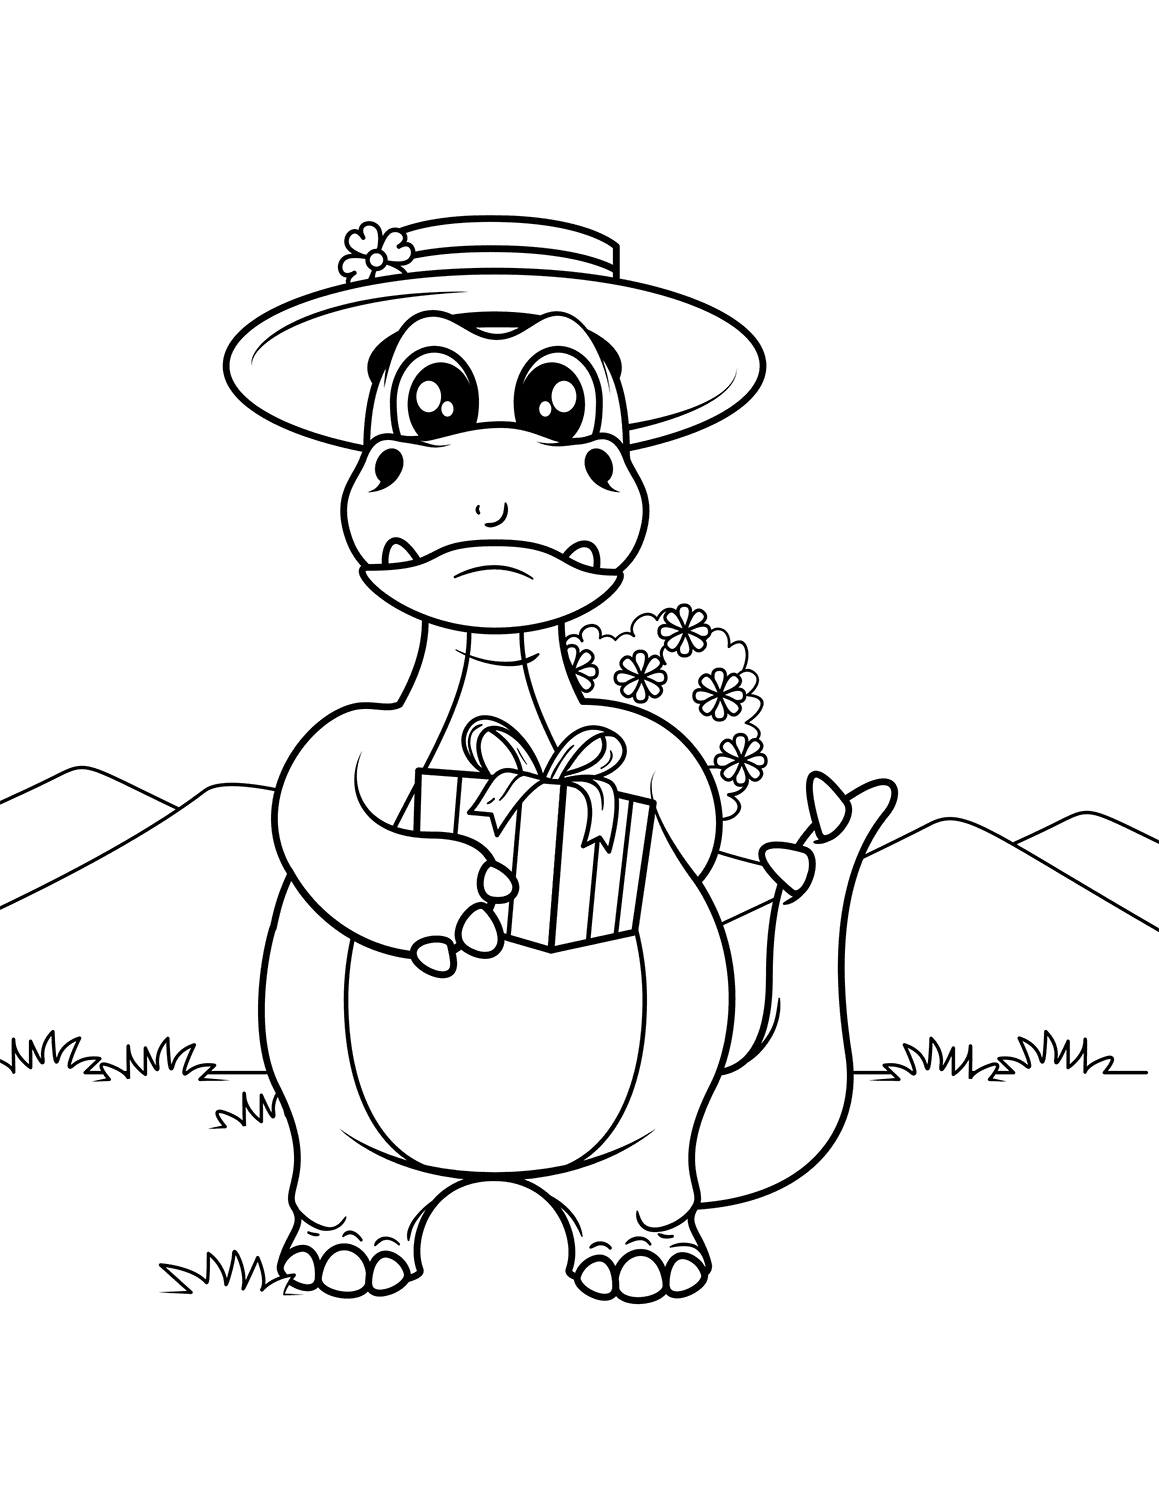 Dinosaur With Gift Box Coloring Pages